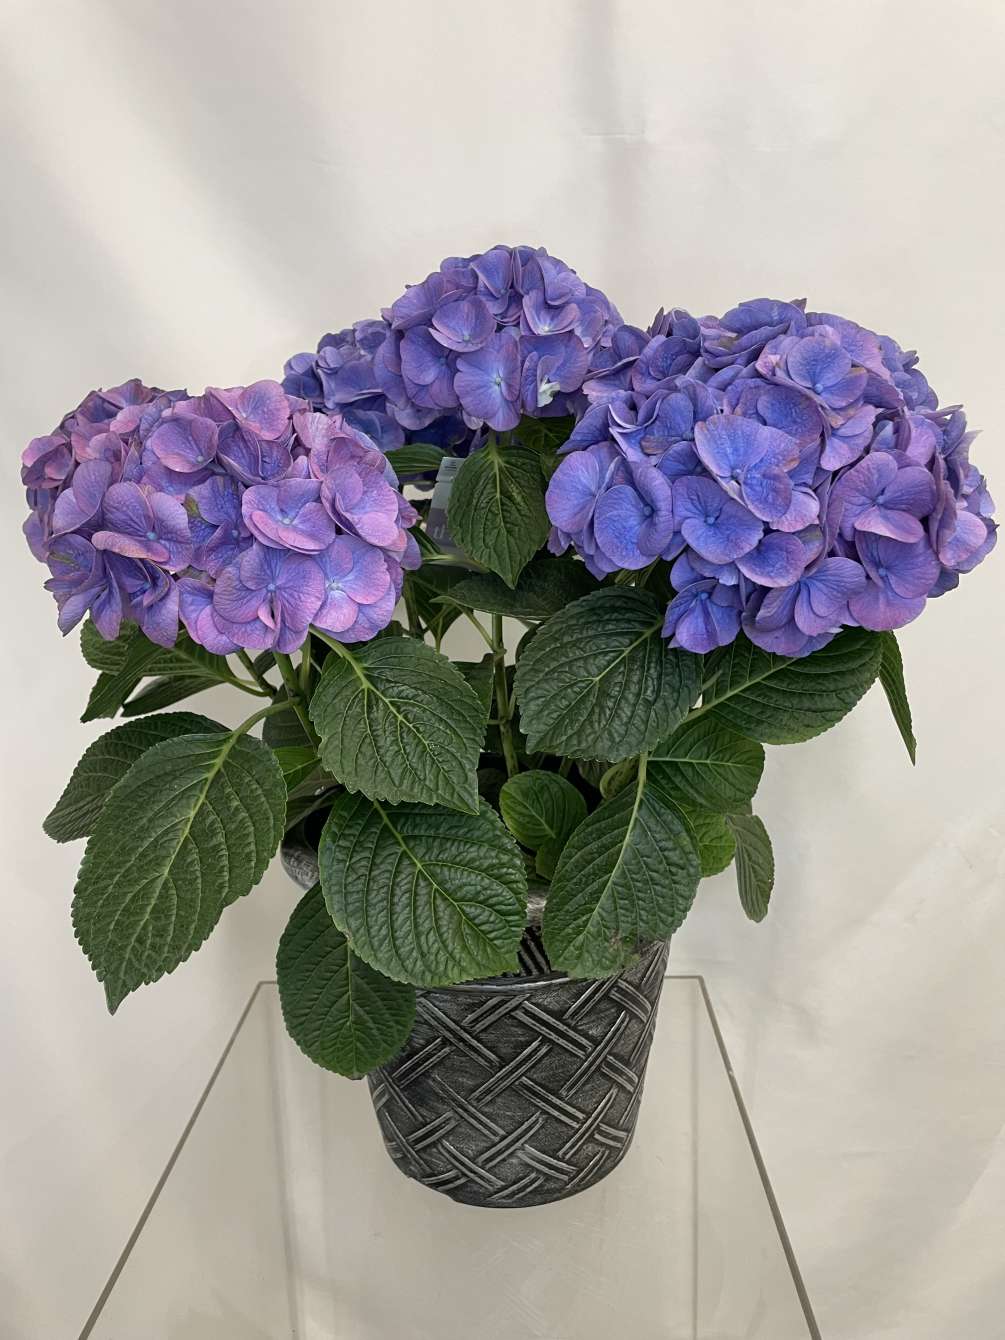 A stunning outdoor Hydrangea plant!! This hydrangea can be enjoyed indoors and